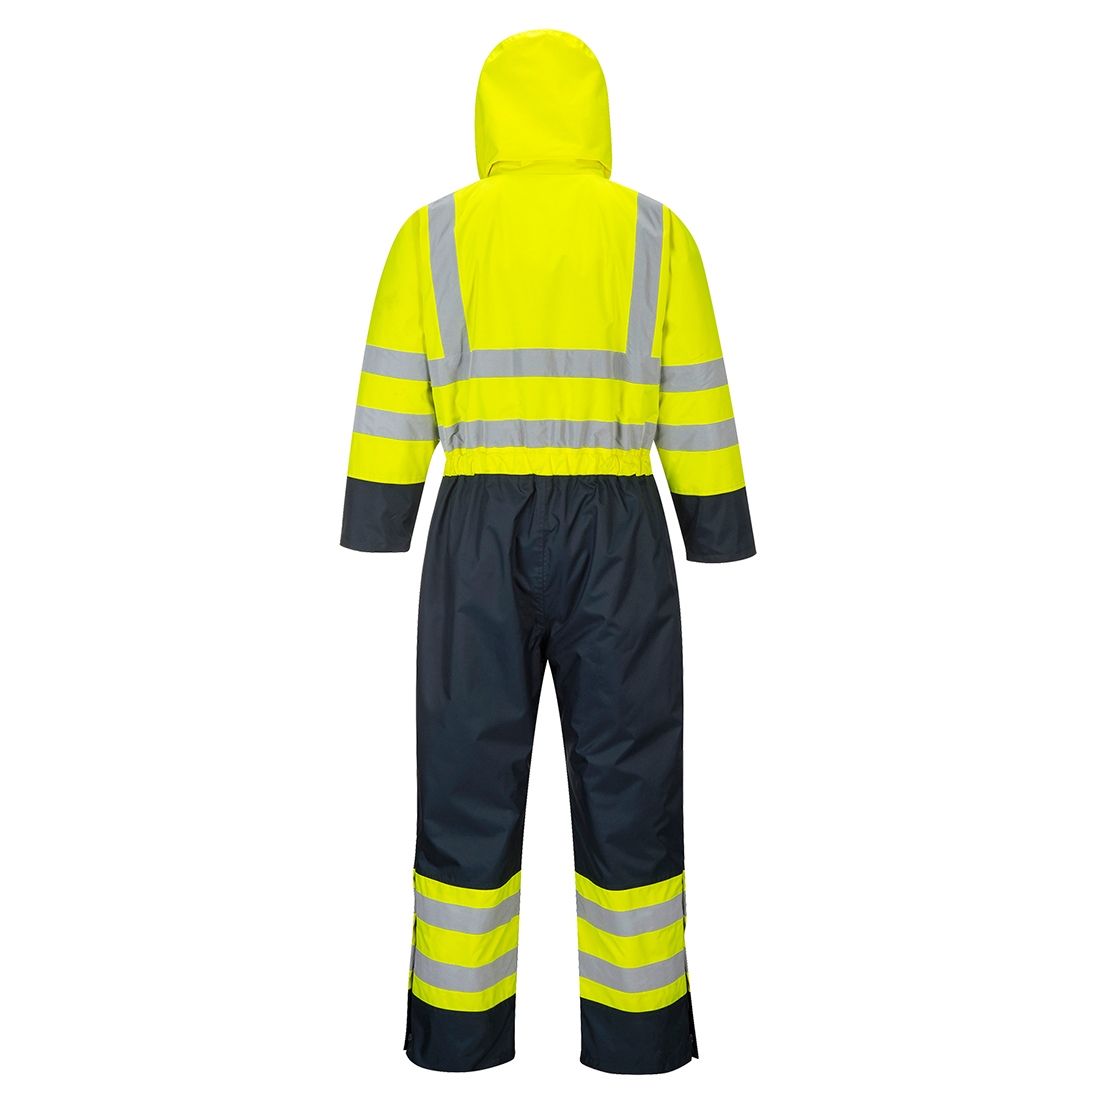 Hi Vis Visible Portwest Bib & braces Contrast Coverall Overall Reflective Yellow 